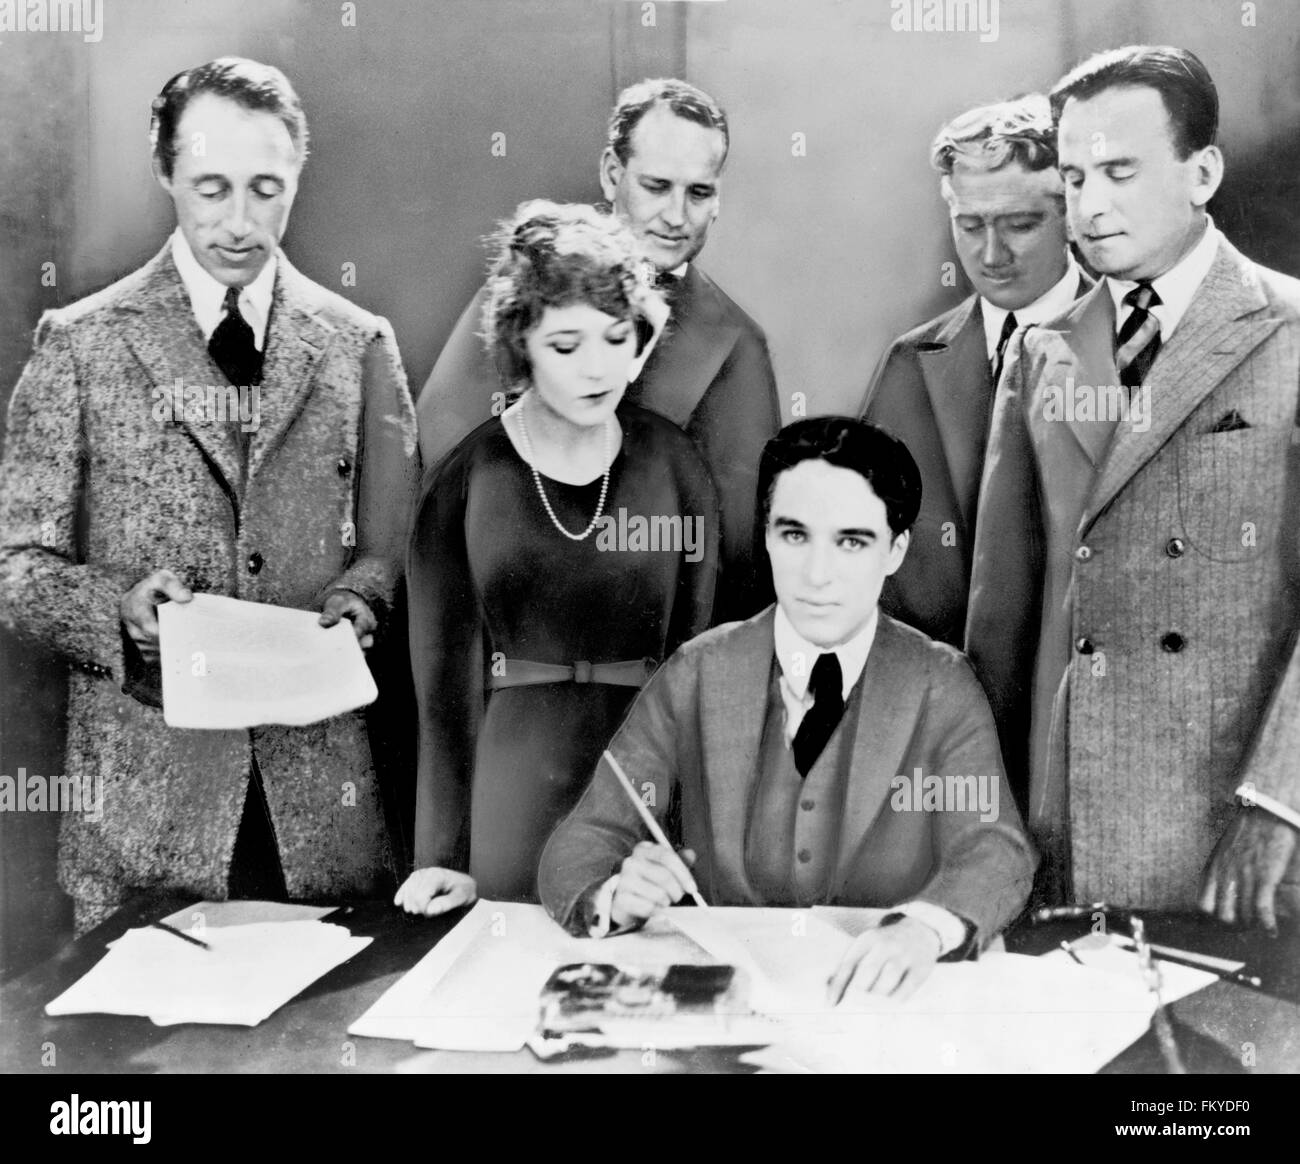 D.W. Griffith, Mary Pickford, Charlie Chaplin (seated) and Douglas Fairbanks at the signing of the contract establishing United Artists motion picture studio in 1919. Two lawyers, Albert Banzhaf (left) and Dennis F. O'Brien, are standing in the background. Stock Photo